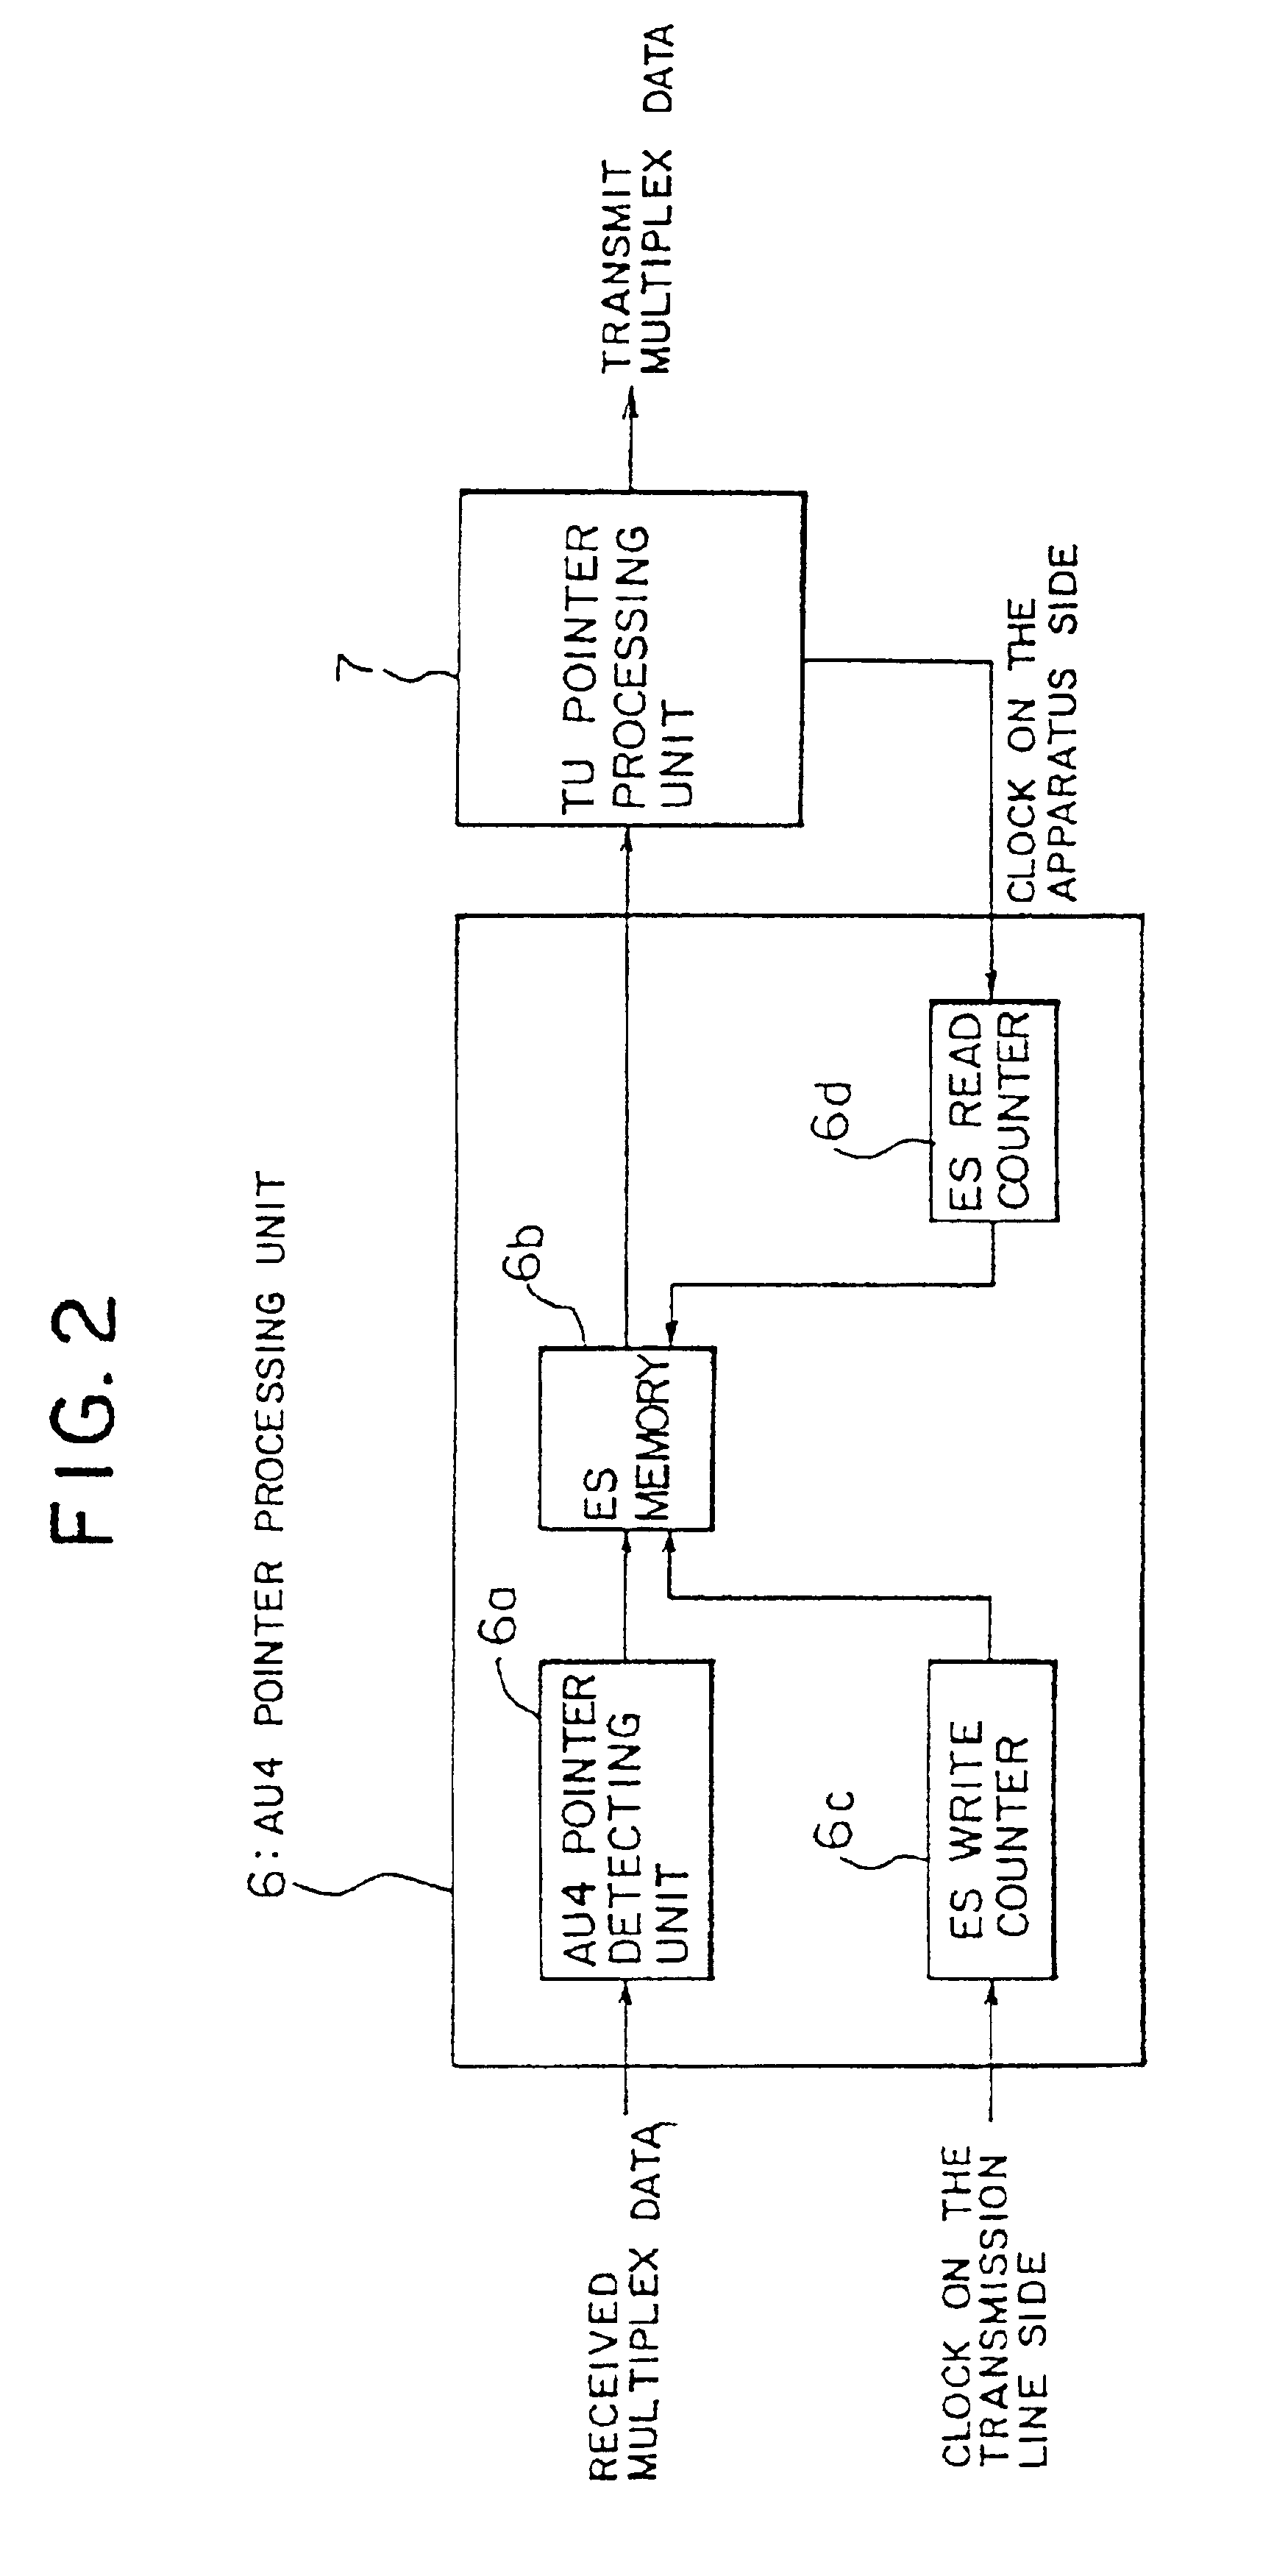 Pointer processing apparatus, POH terminating process apparatus, method of POH terminating process and pointer/POH terminating process apparatus in SDH transmission system